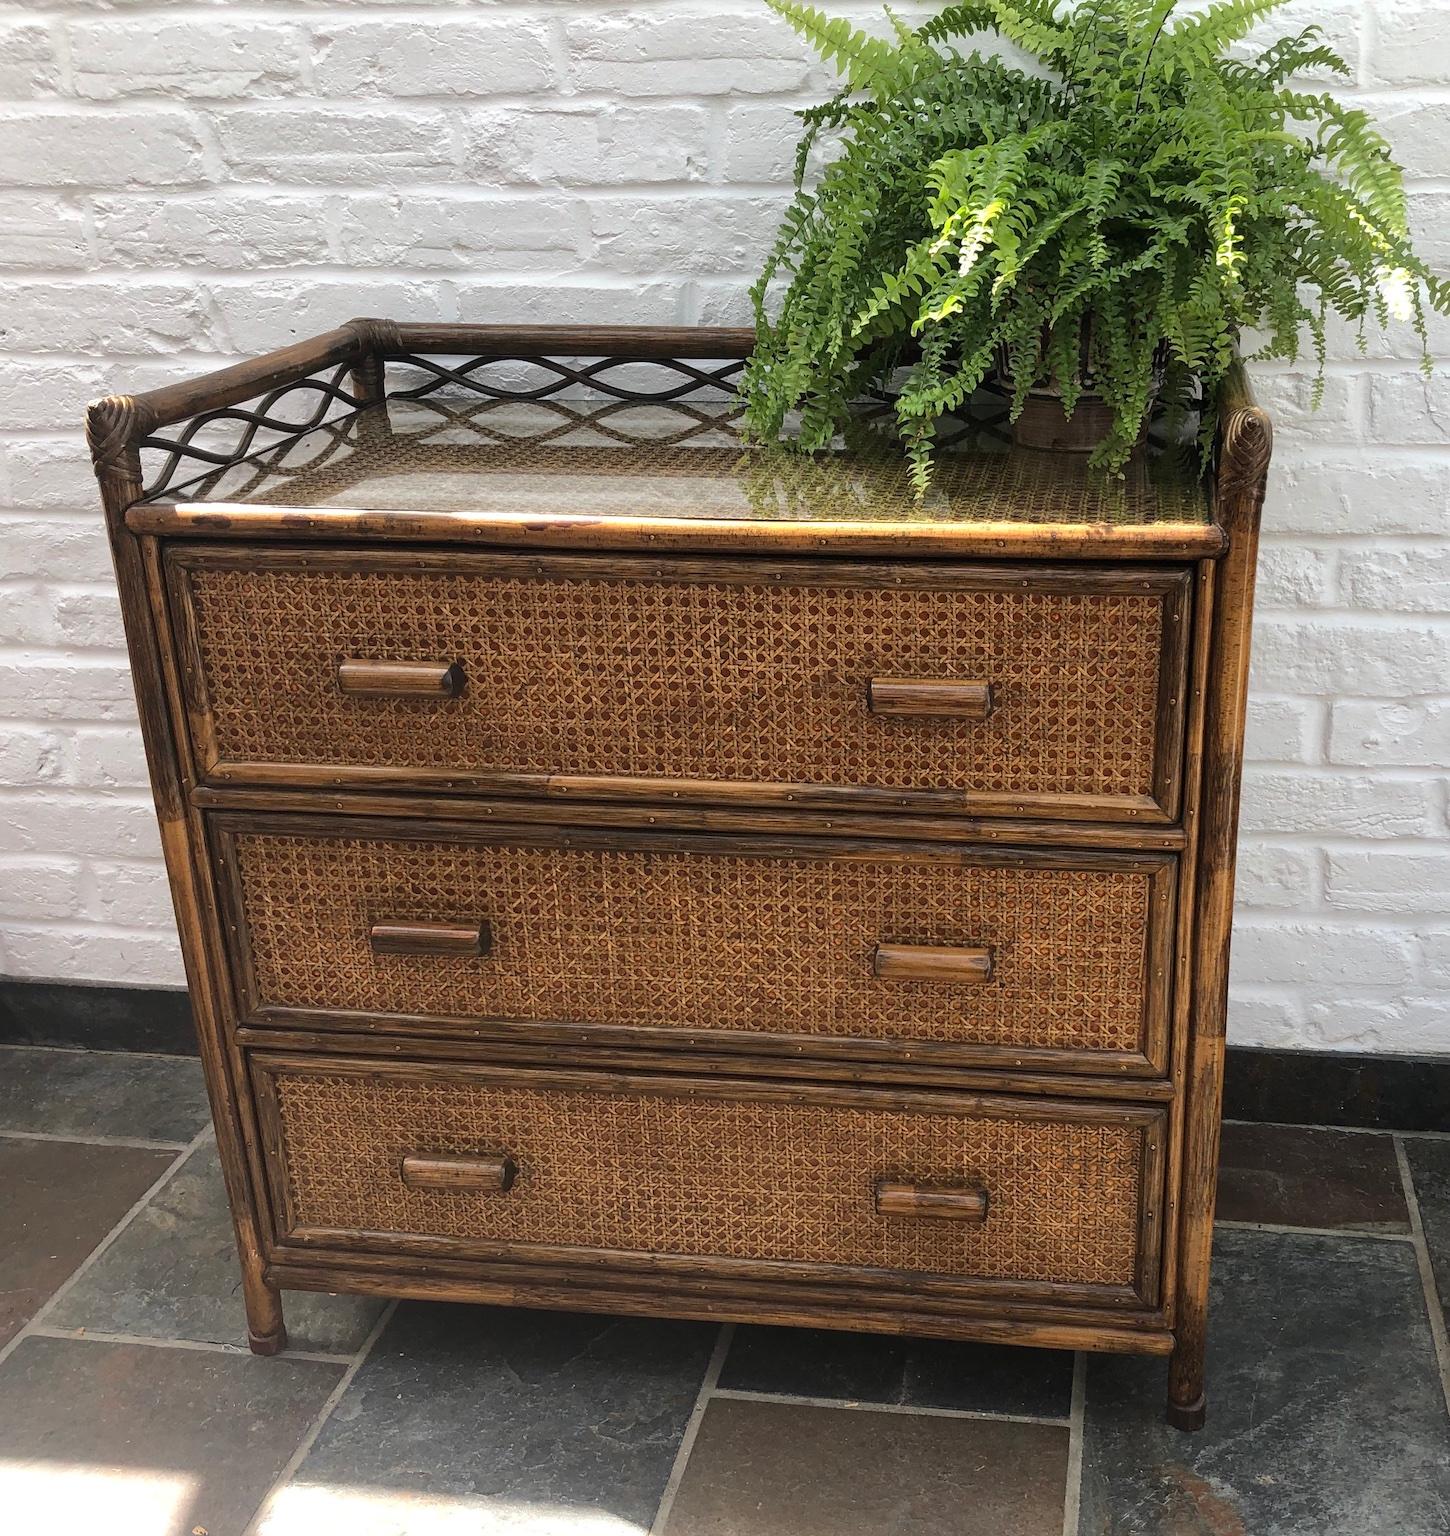 Midcentury rattan / cane chest of drawers by Angraves, England, 1970s.

This is a beautiful rattan / cane chest of drawers.
Made by English company ‘Angraves’ Brook St, Leicester, part of the “invincible” range.  

The chest of drawers has 3 drawers